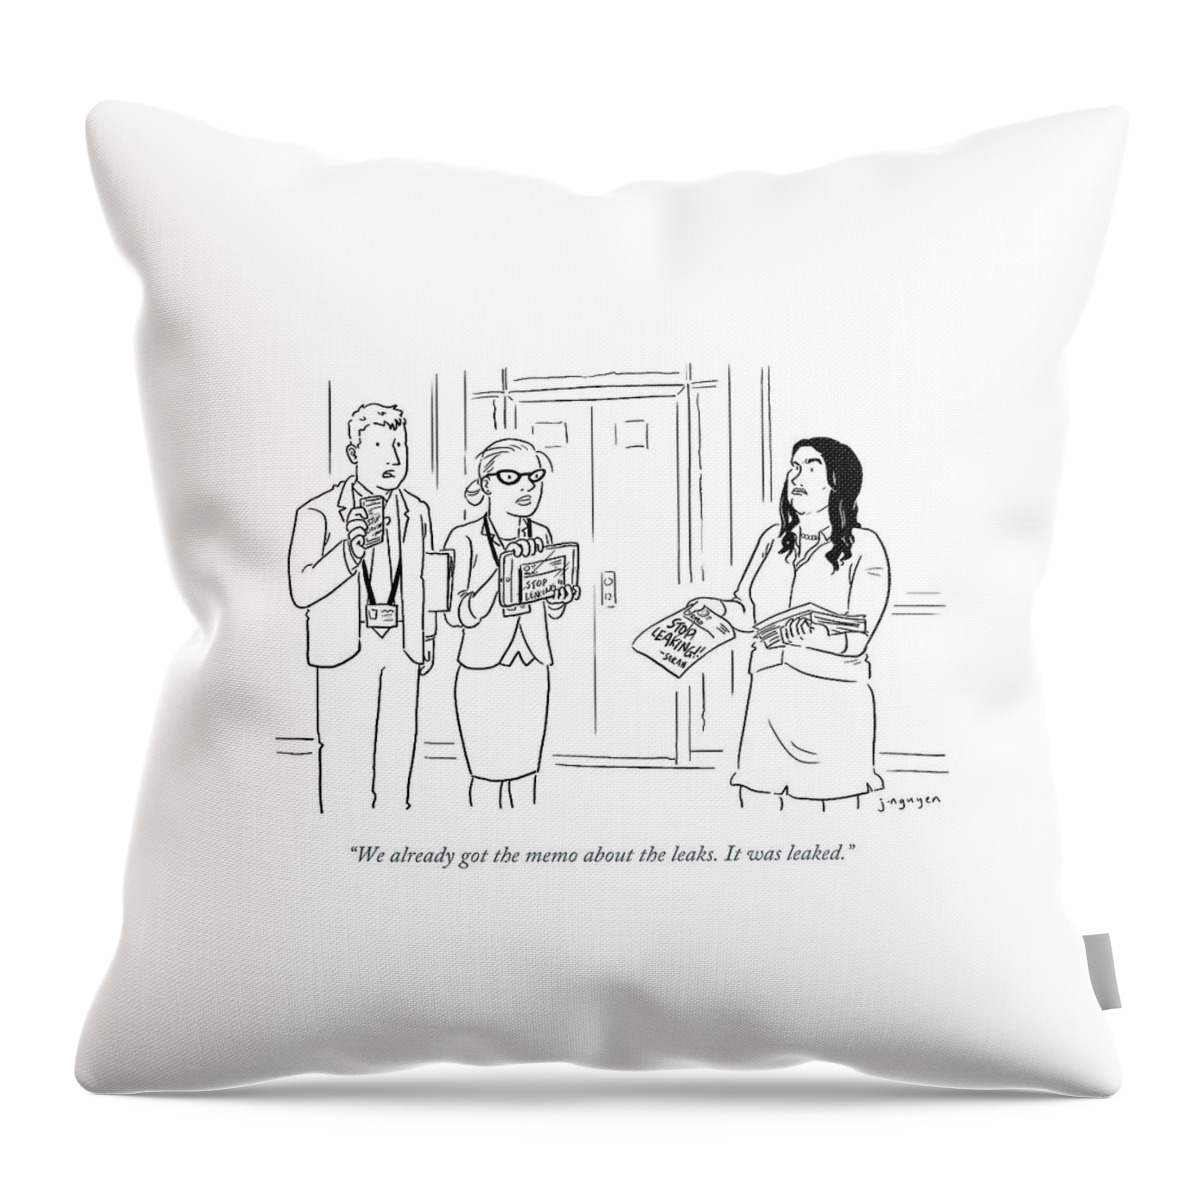 The Memo About The Leaks Throw Pillow